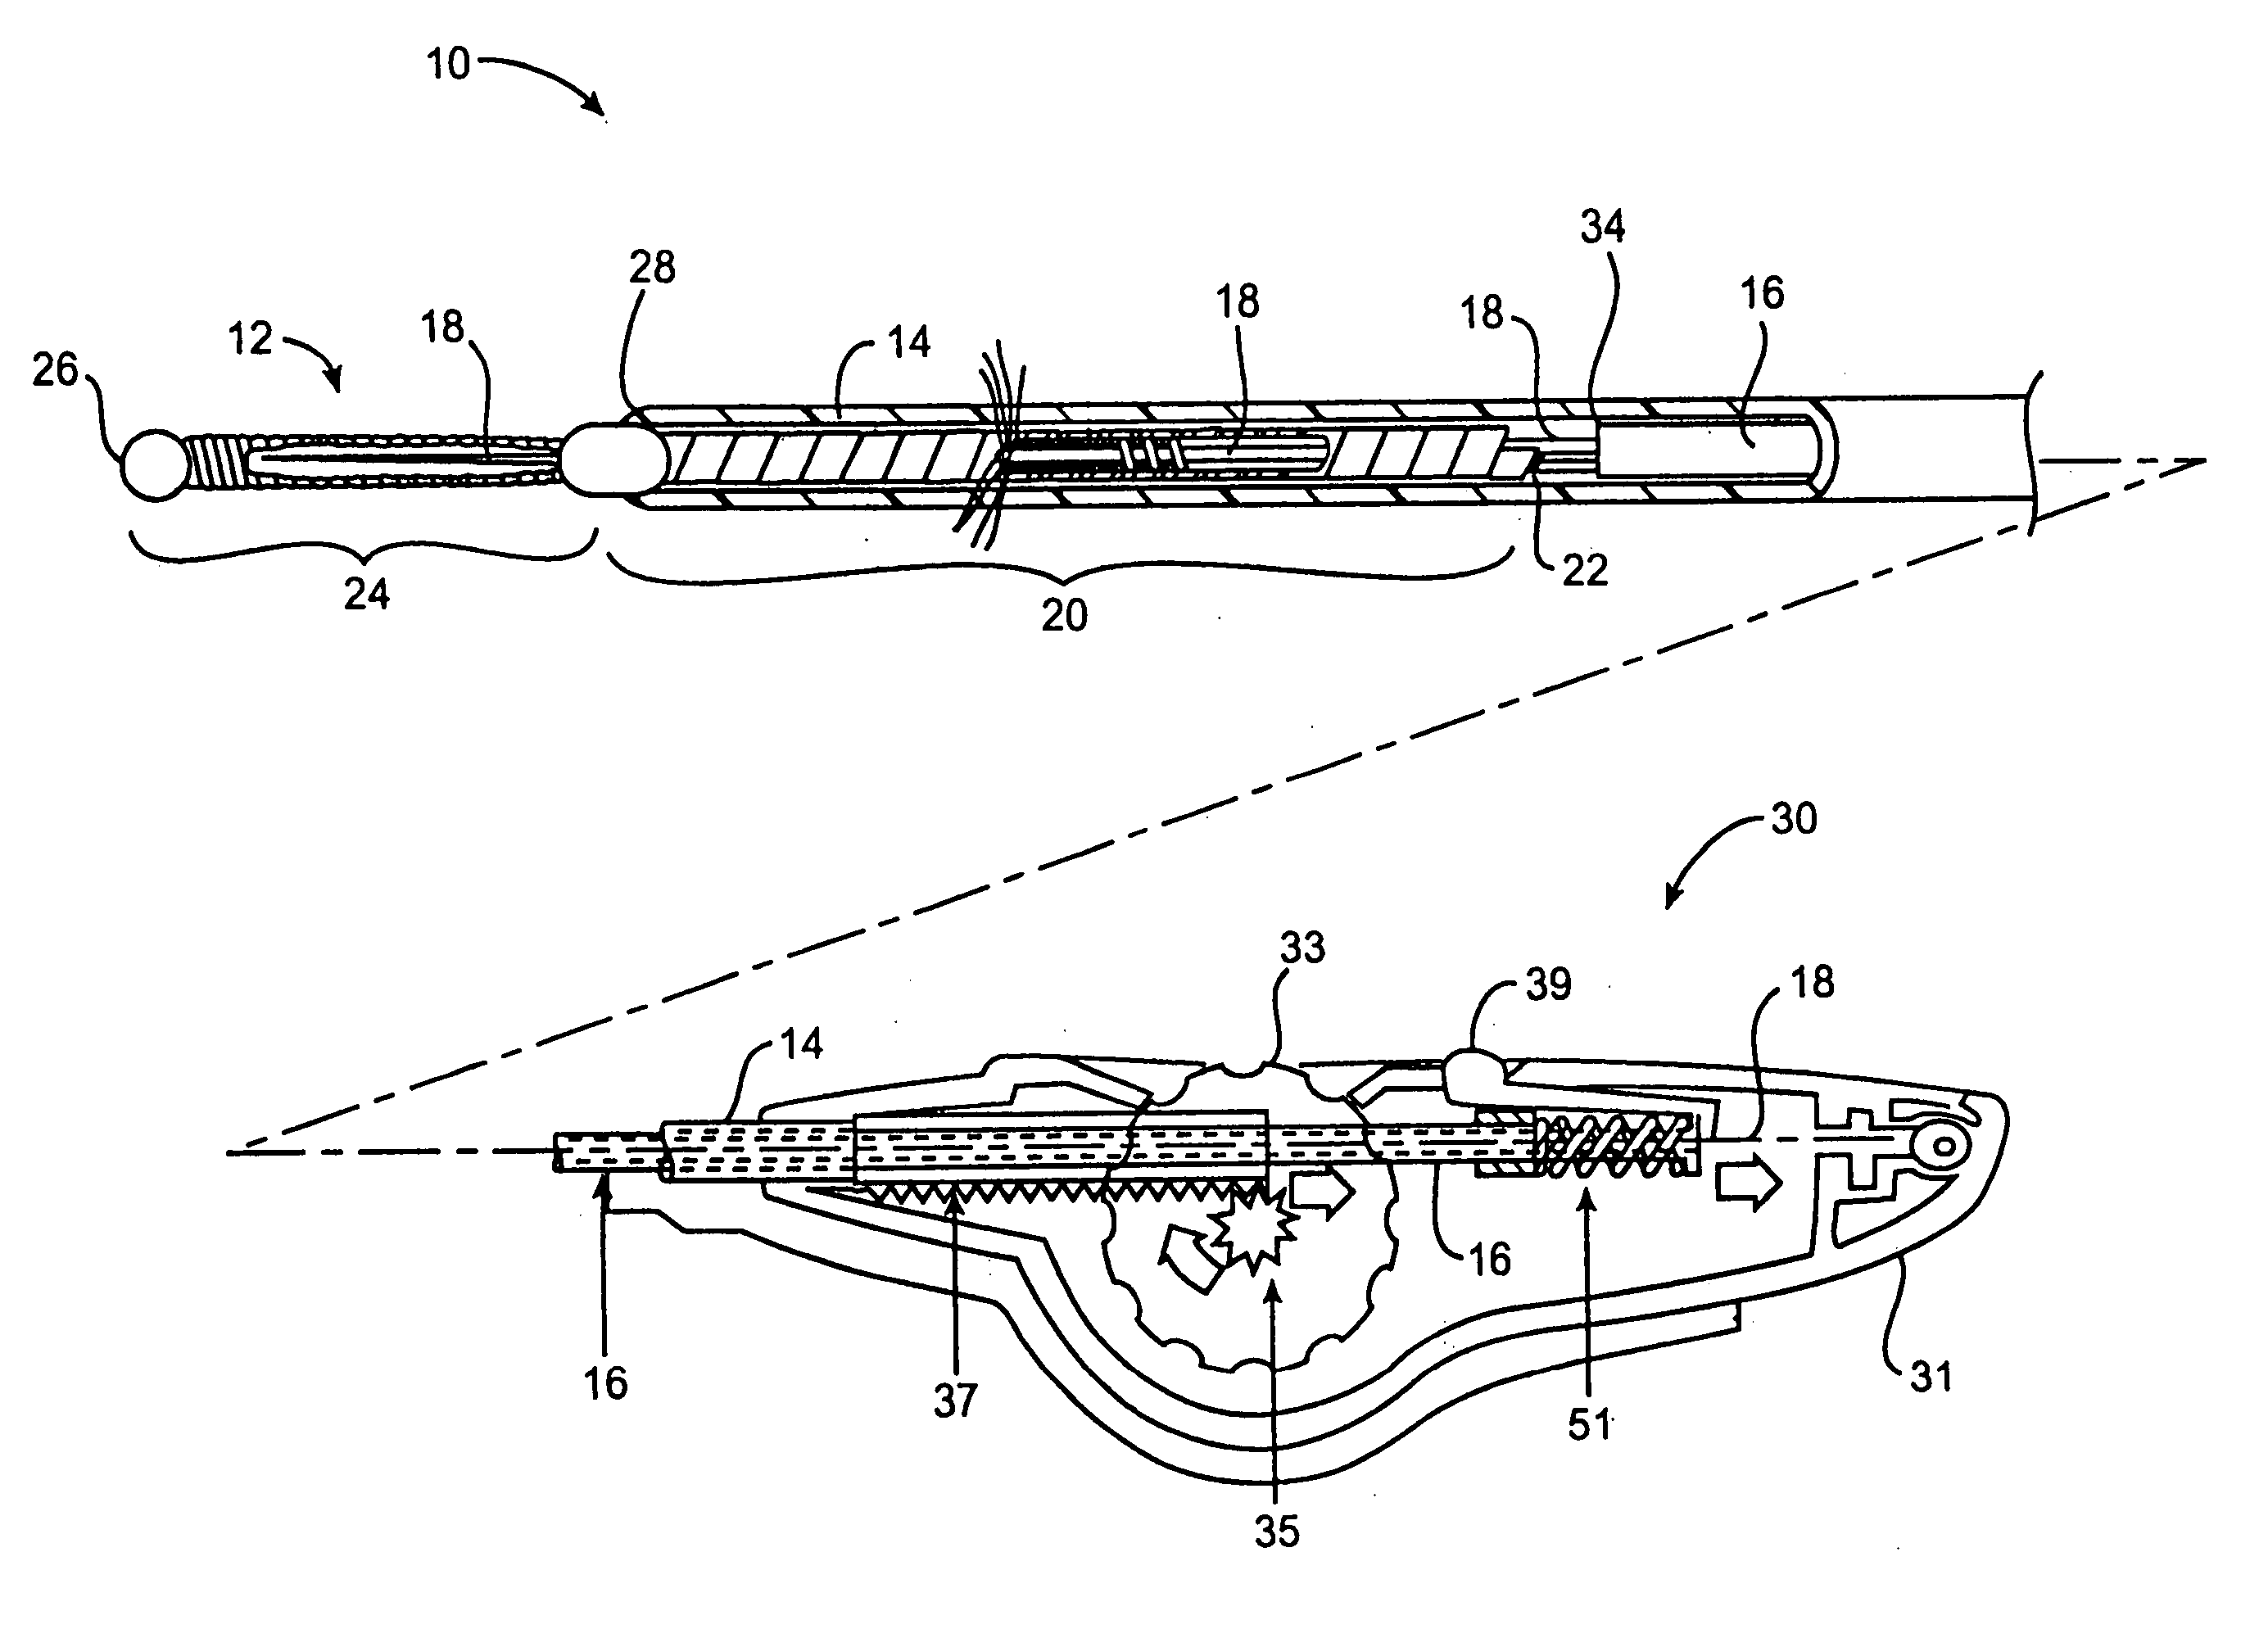 Deployment actuation system for intrafallopian contraception